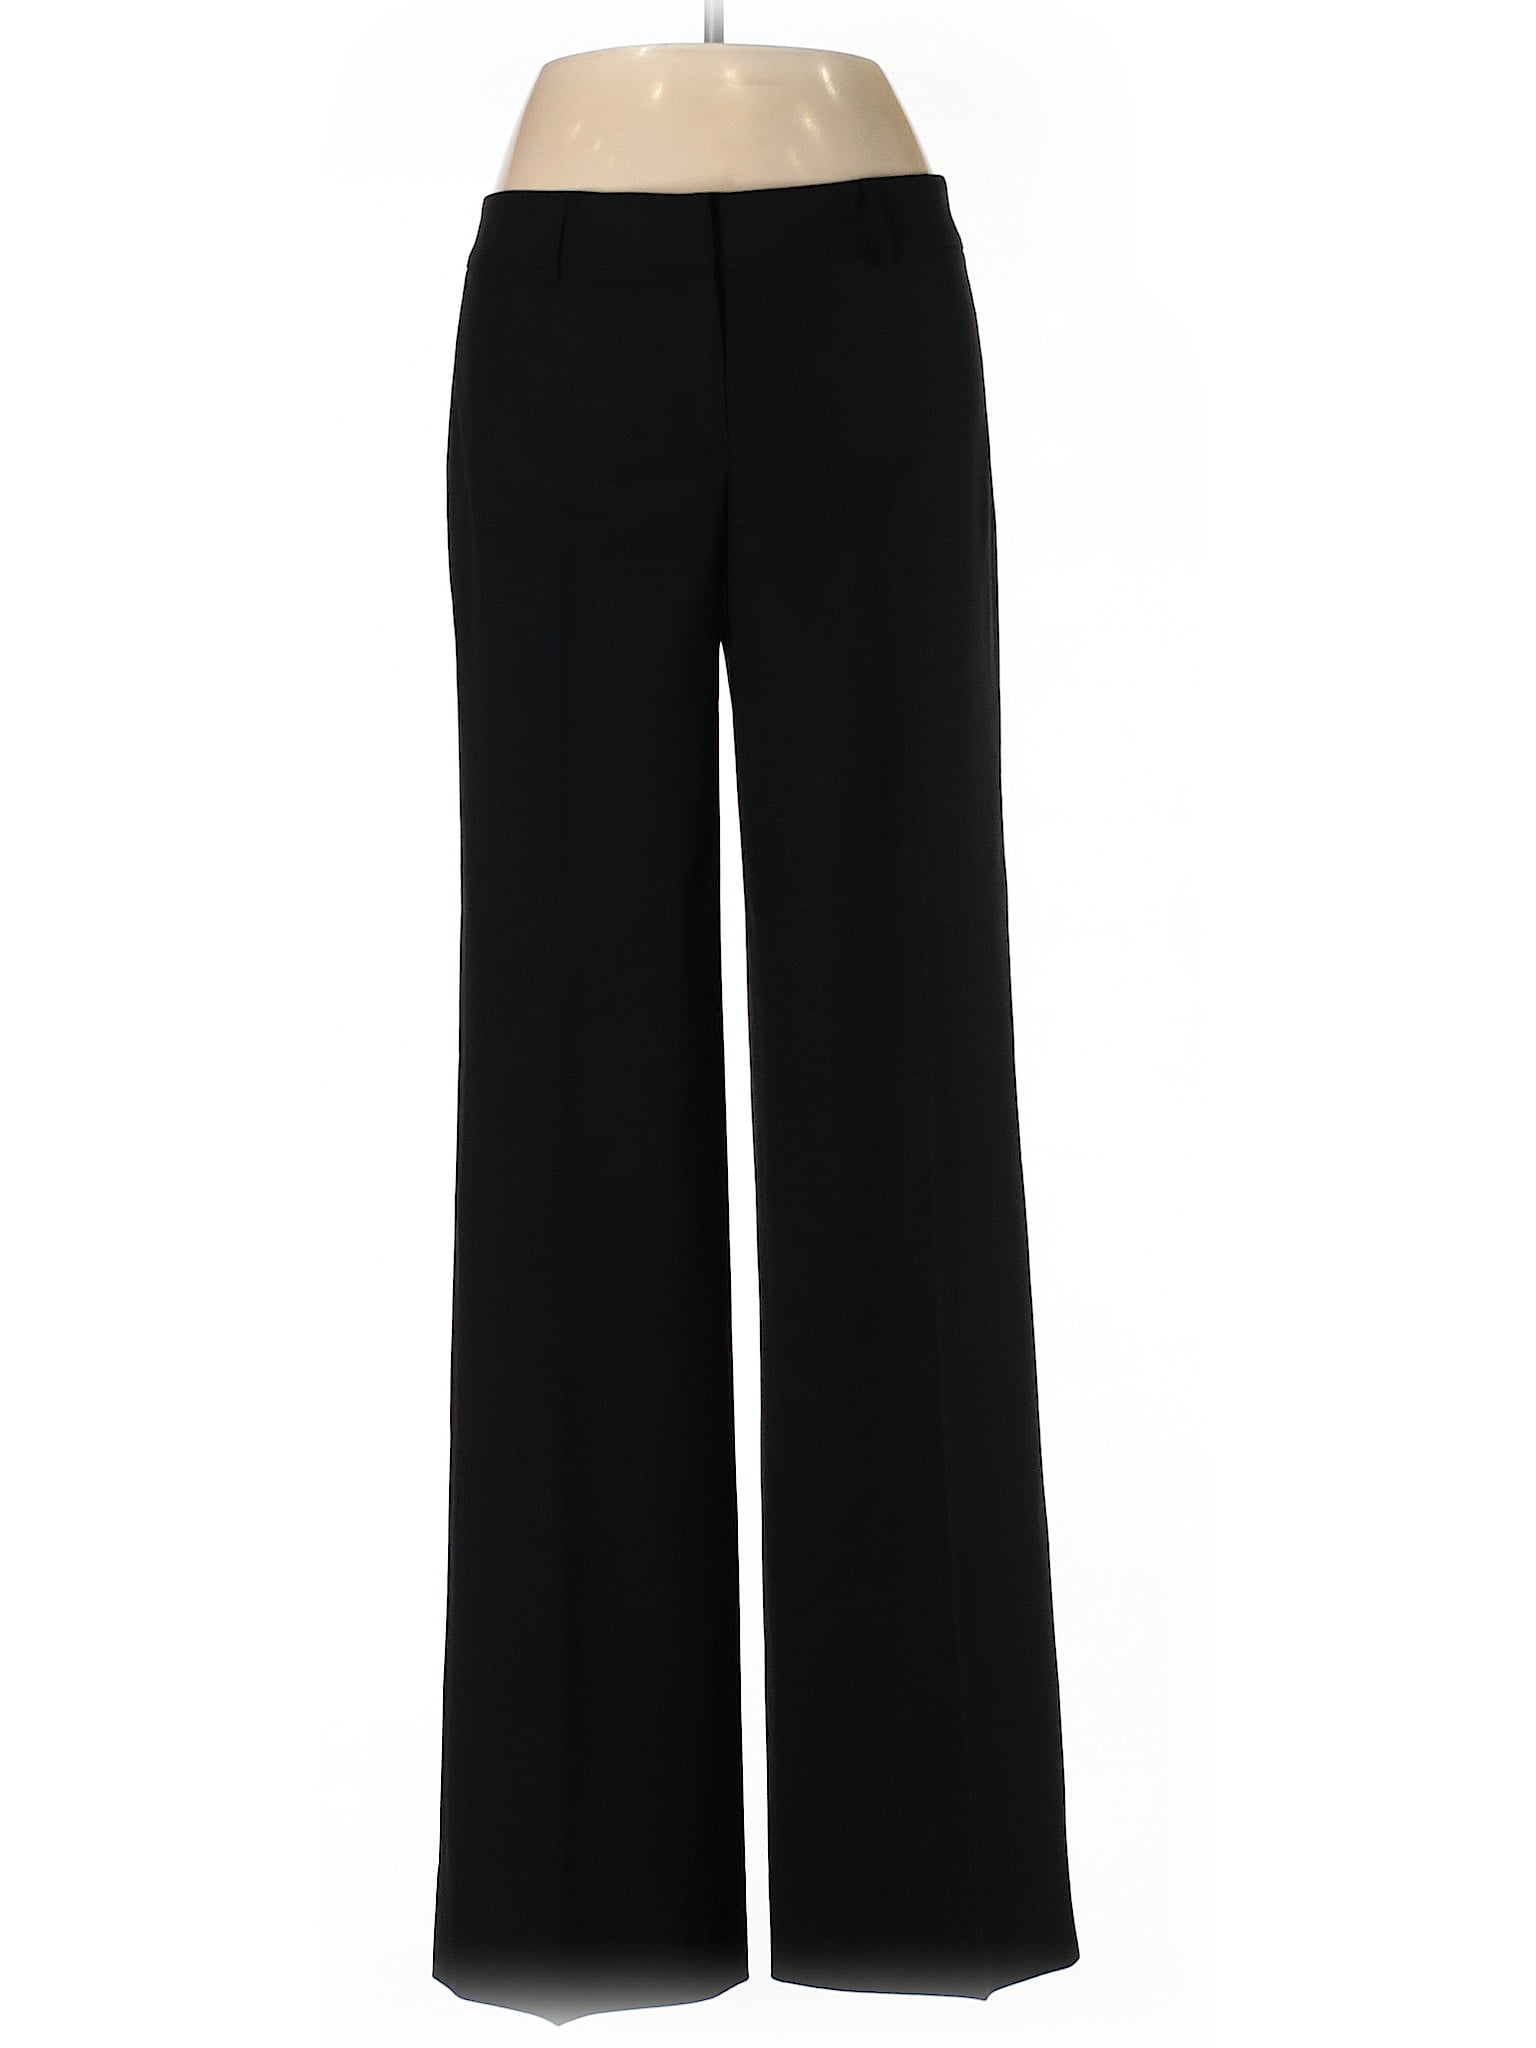 Theory - Pre-Owned Theory Women's Size 6 Wool Pants - Walmart.com ...